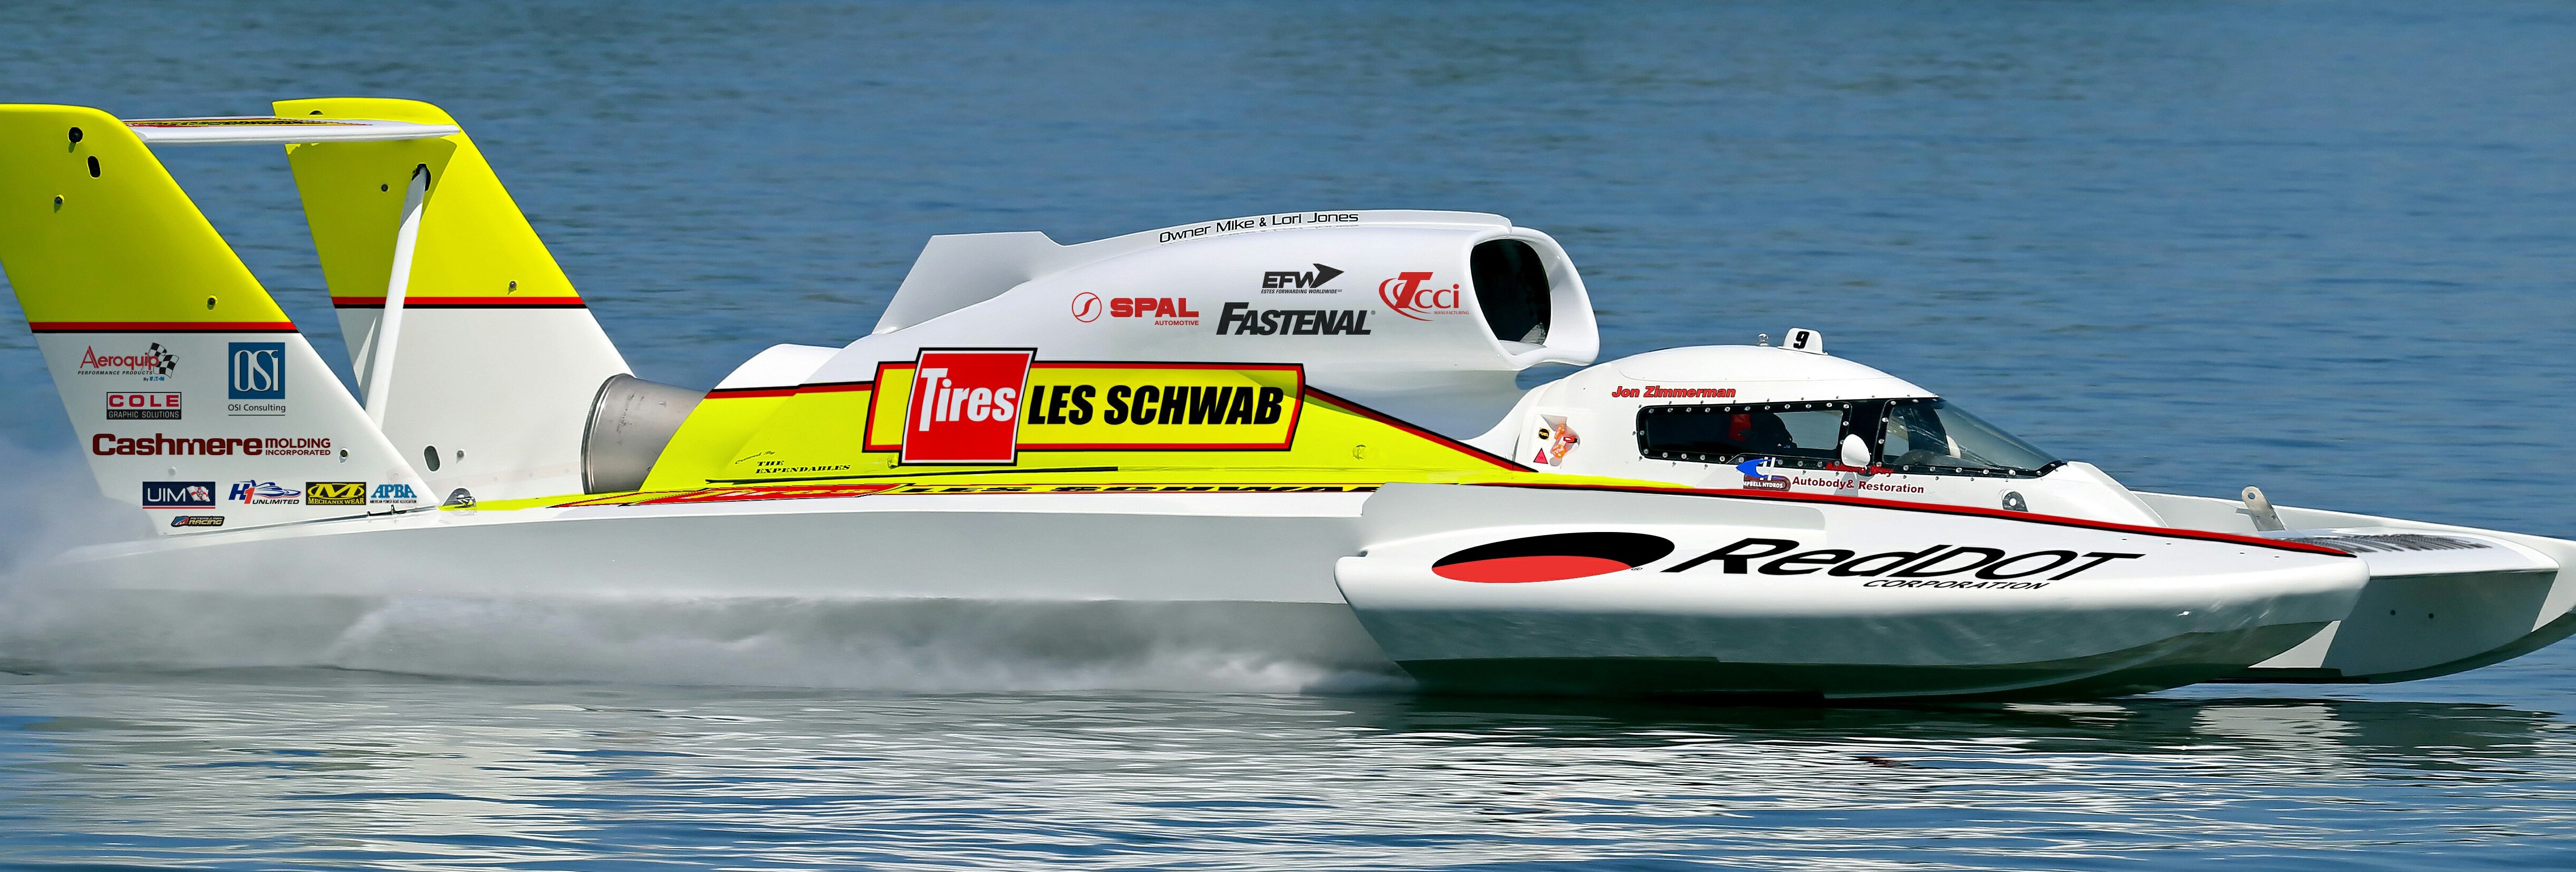 unlimited hydroplane, Race, Racing, Boat, Ship, Unlimited, Hydroplane, Jet,  12 Wallpaper